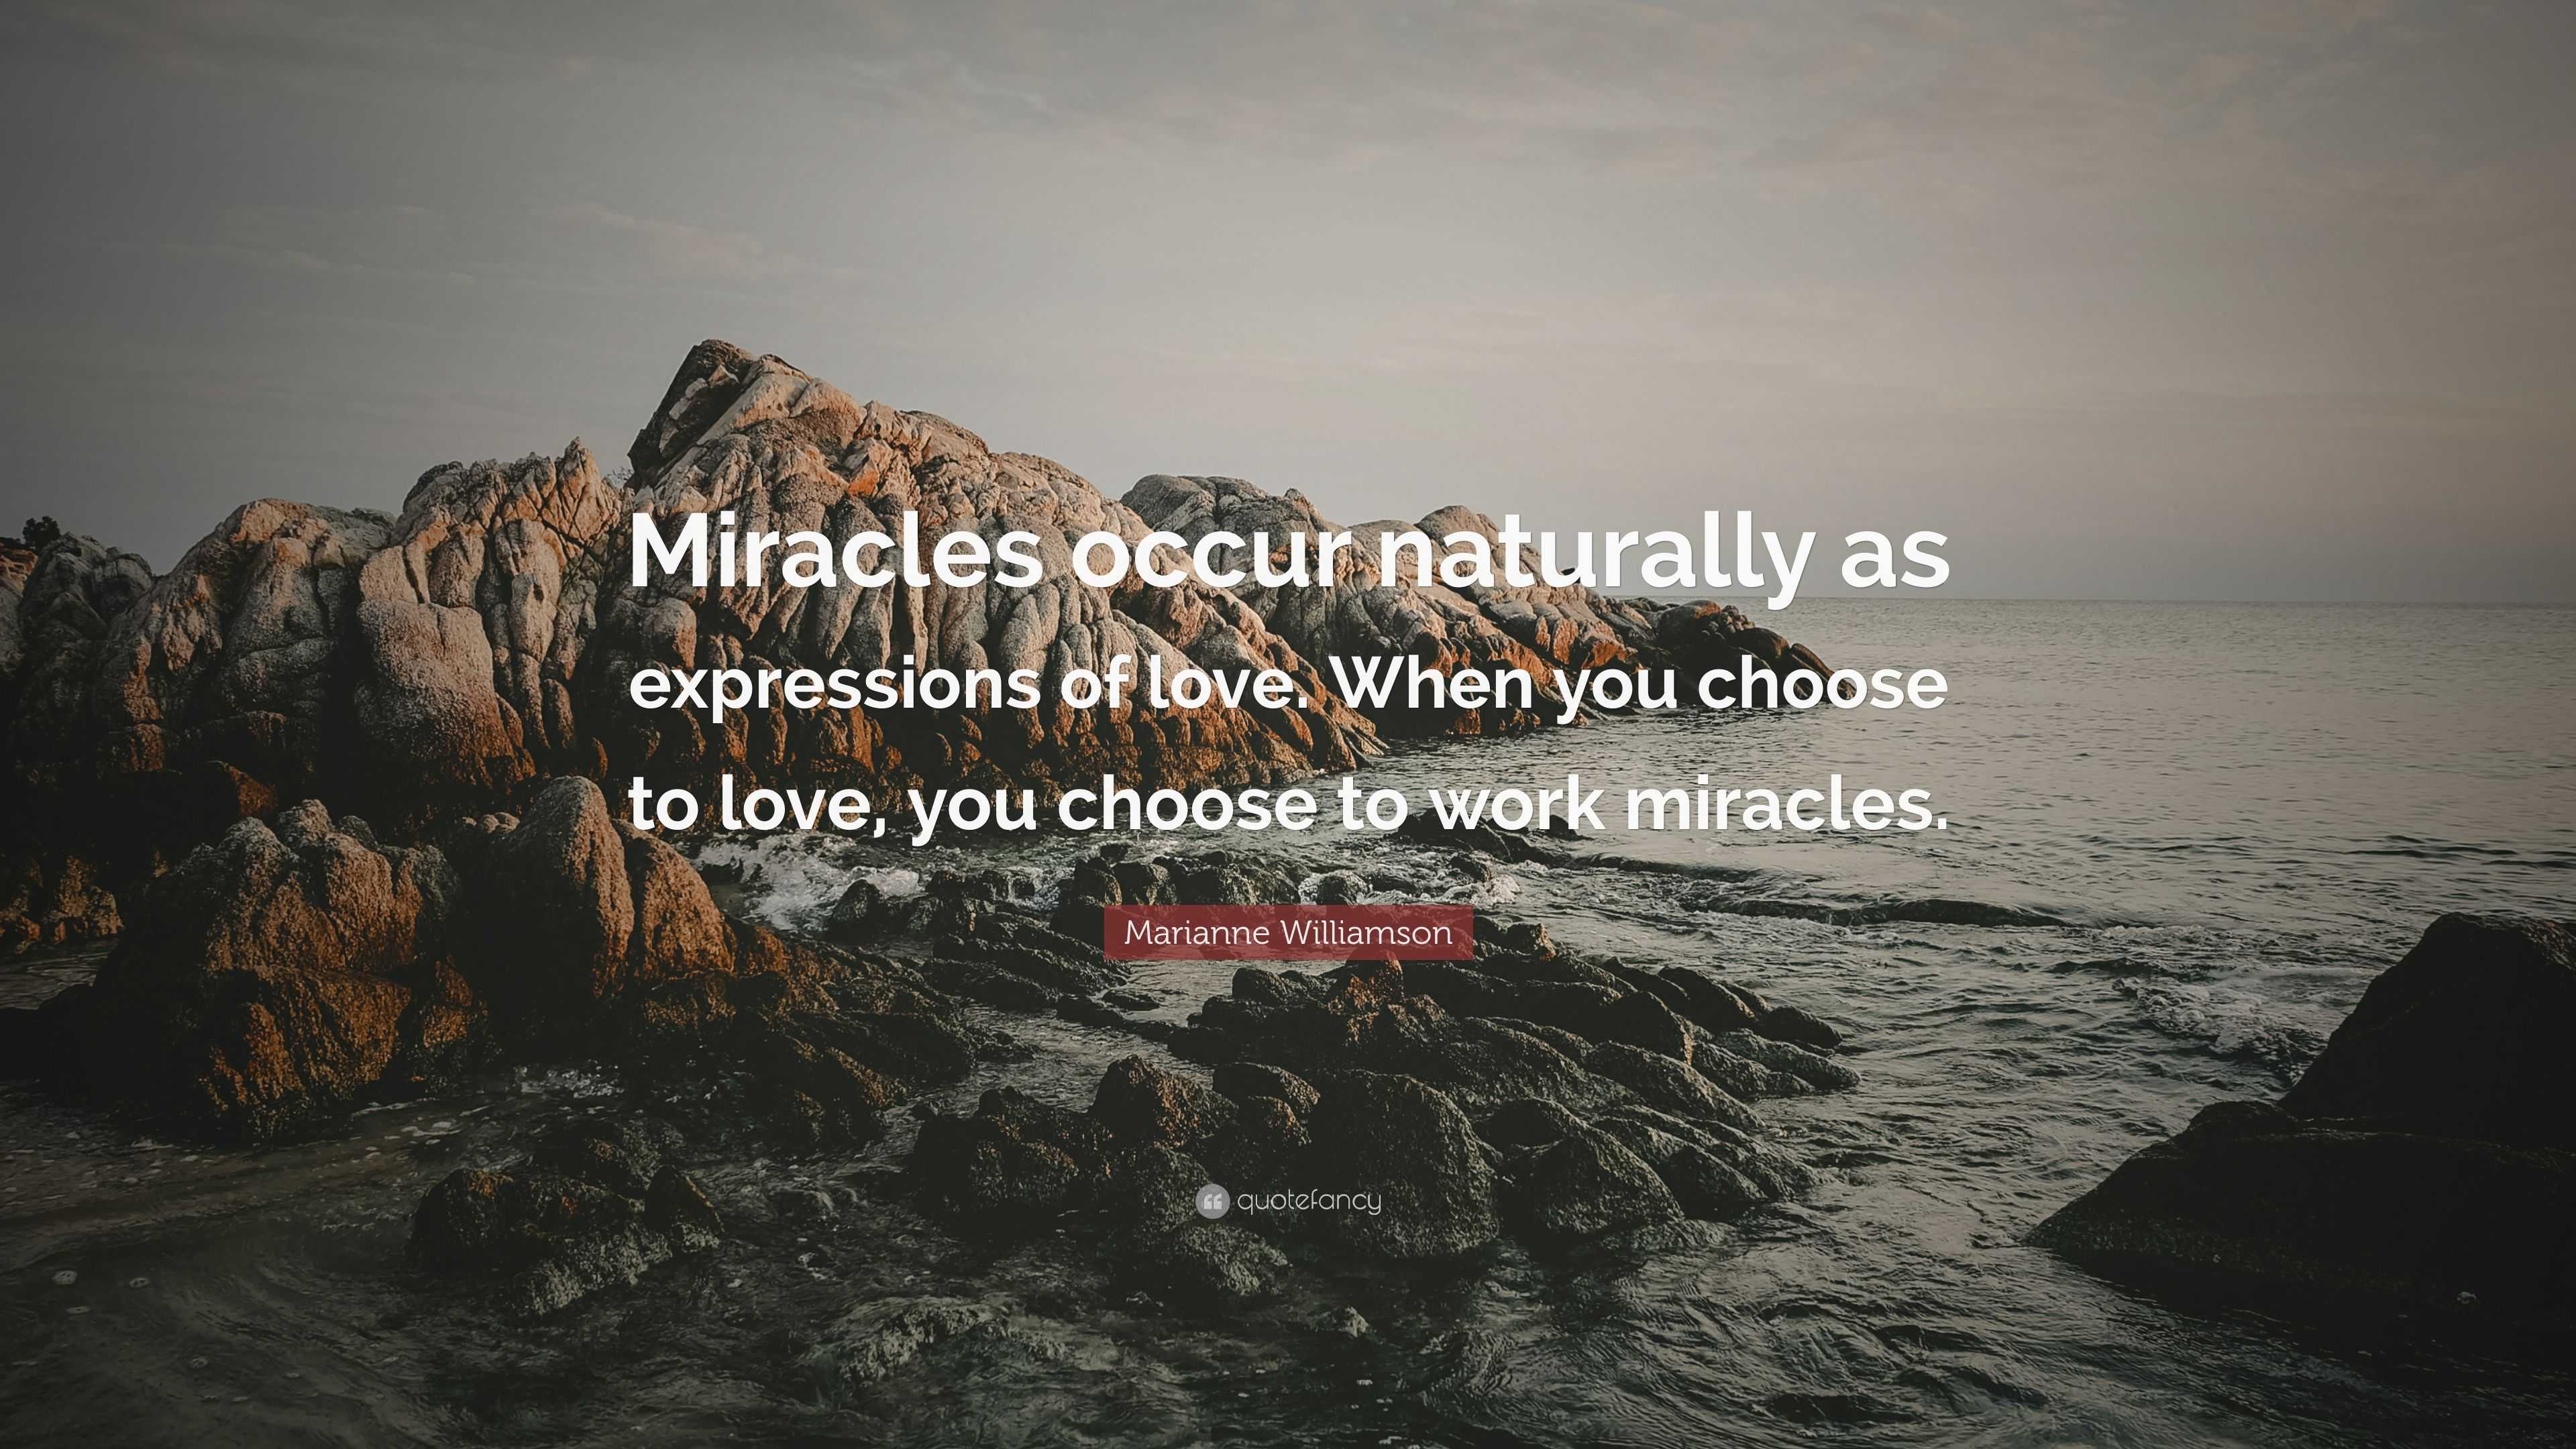 Marianne Williamson Quote: “Miracles occur naturally as expressions of  love. When you choose to love, you